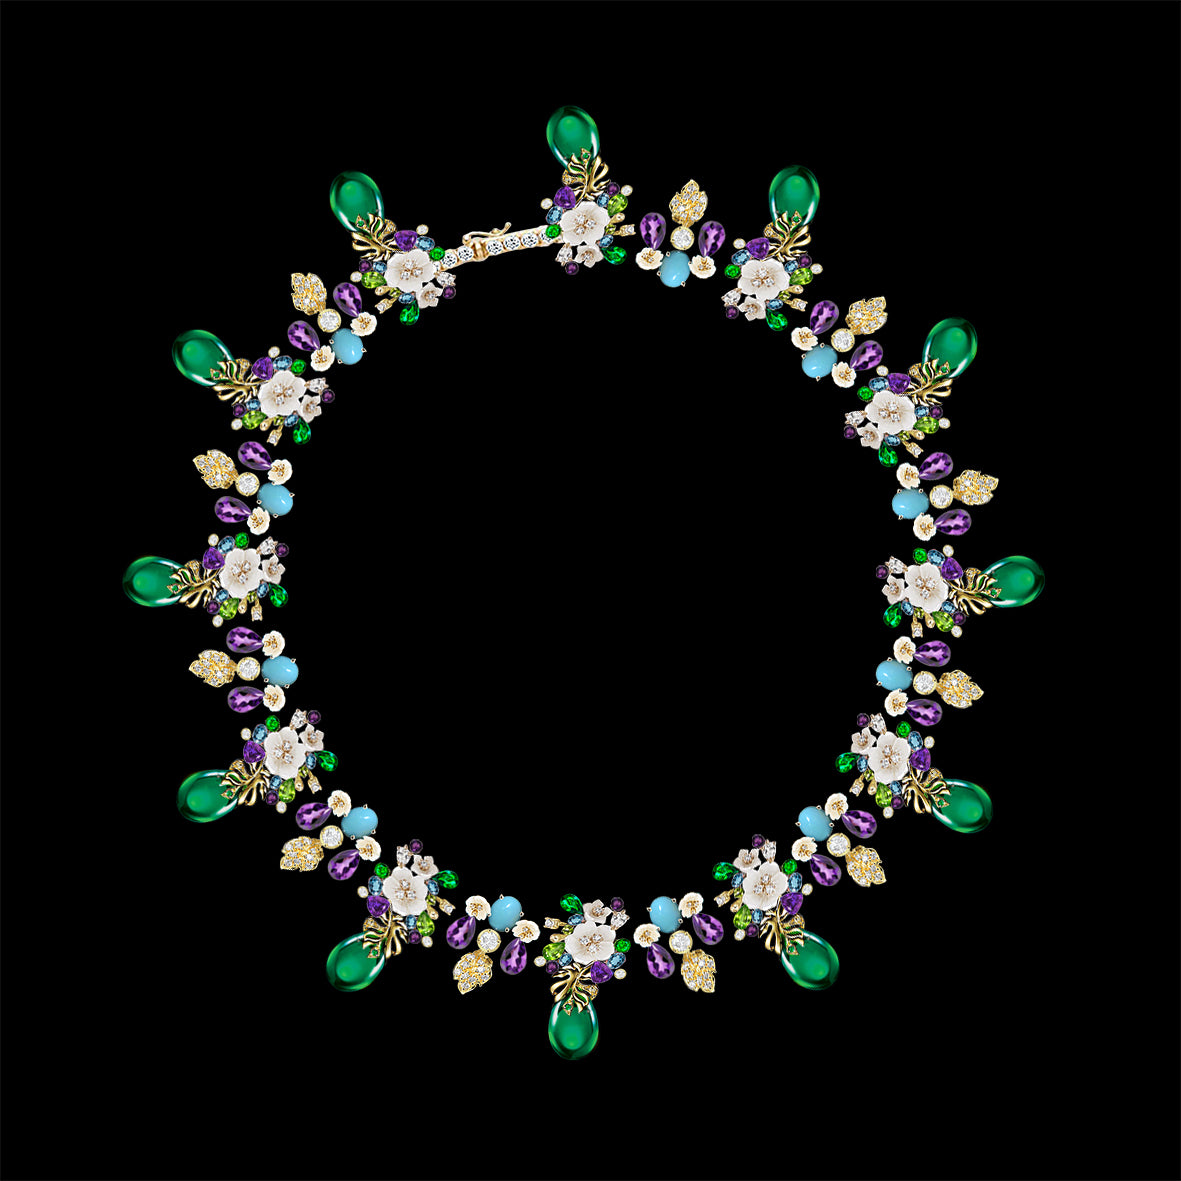 Emerald Amethyst Palm Paradise Necklace, Necklace, Anabela Chan Joaillerie - Fine jewelry with laboratory grown and created gemstones hand-crafted in the United Kingdom. Anabela Chan Joaillerie is the first fine jewellery brand in the world to champion laboratory-grown and created gemstones with high jewellery design, artisanal craftsmanship and a focus on ethical and sustainable innovations.